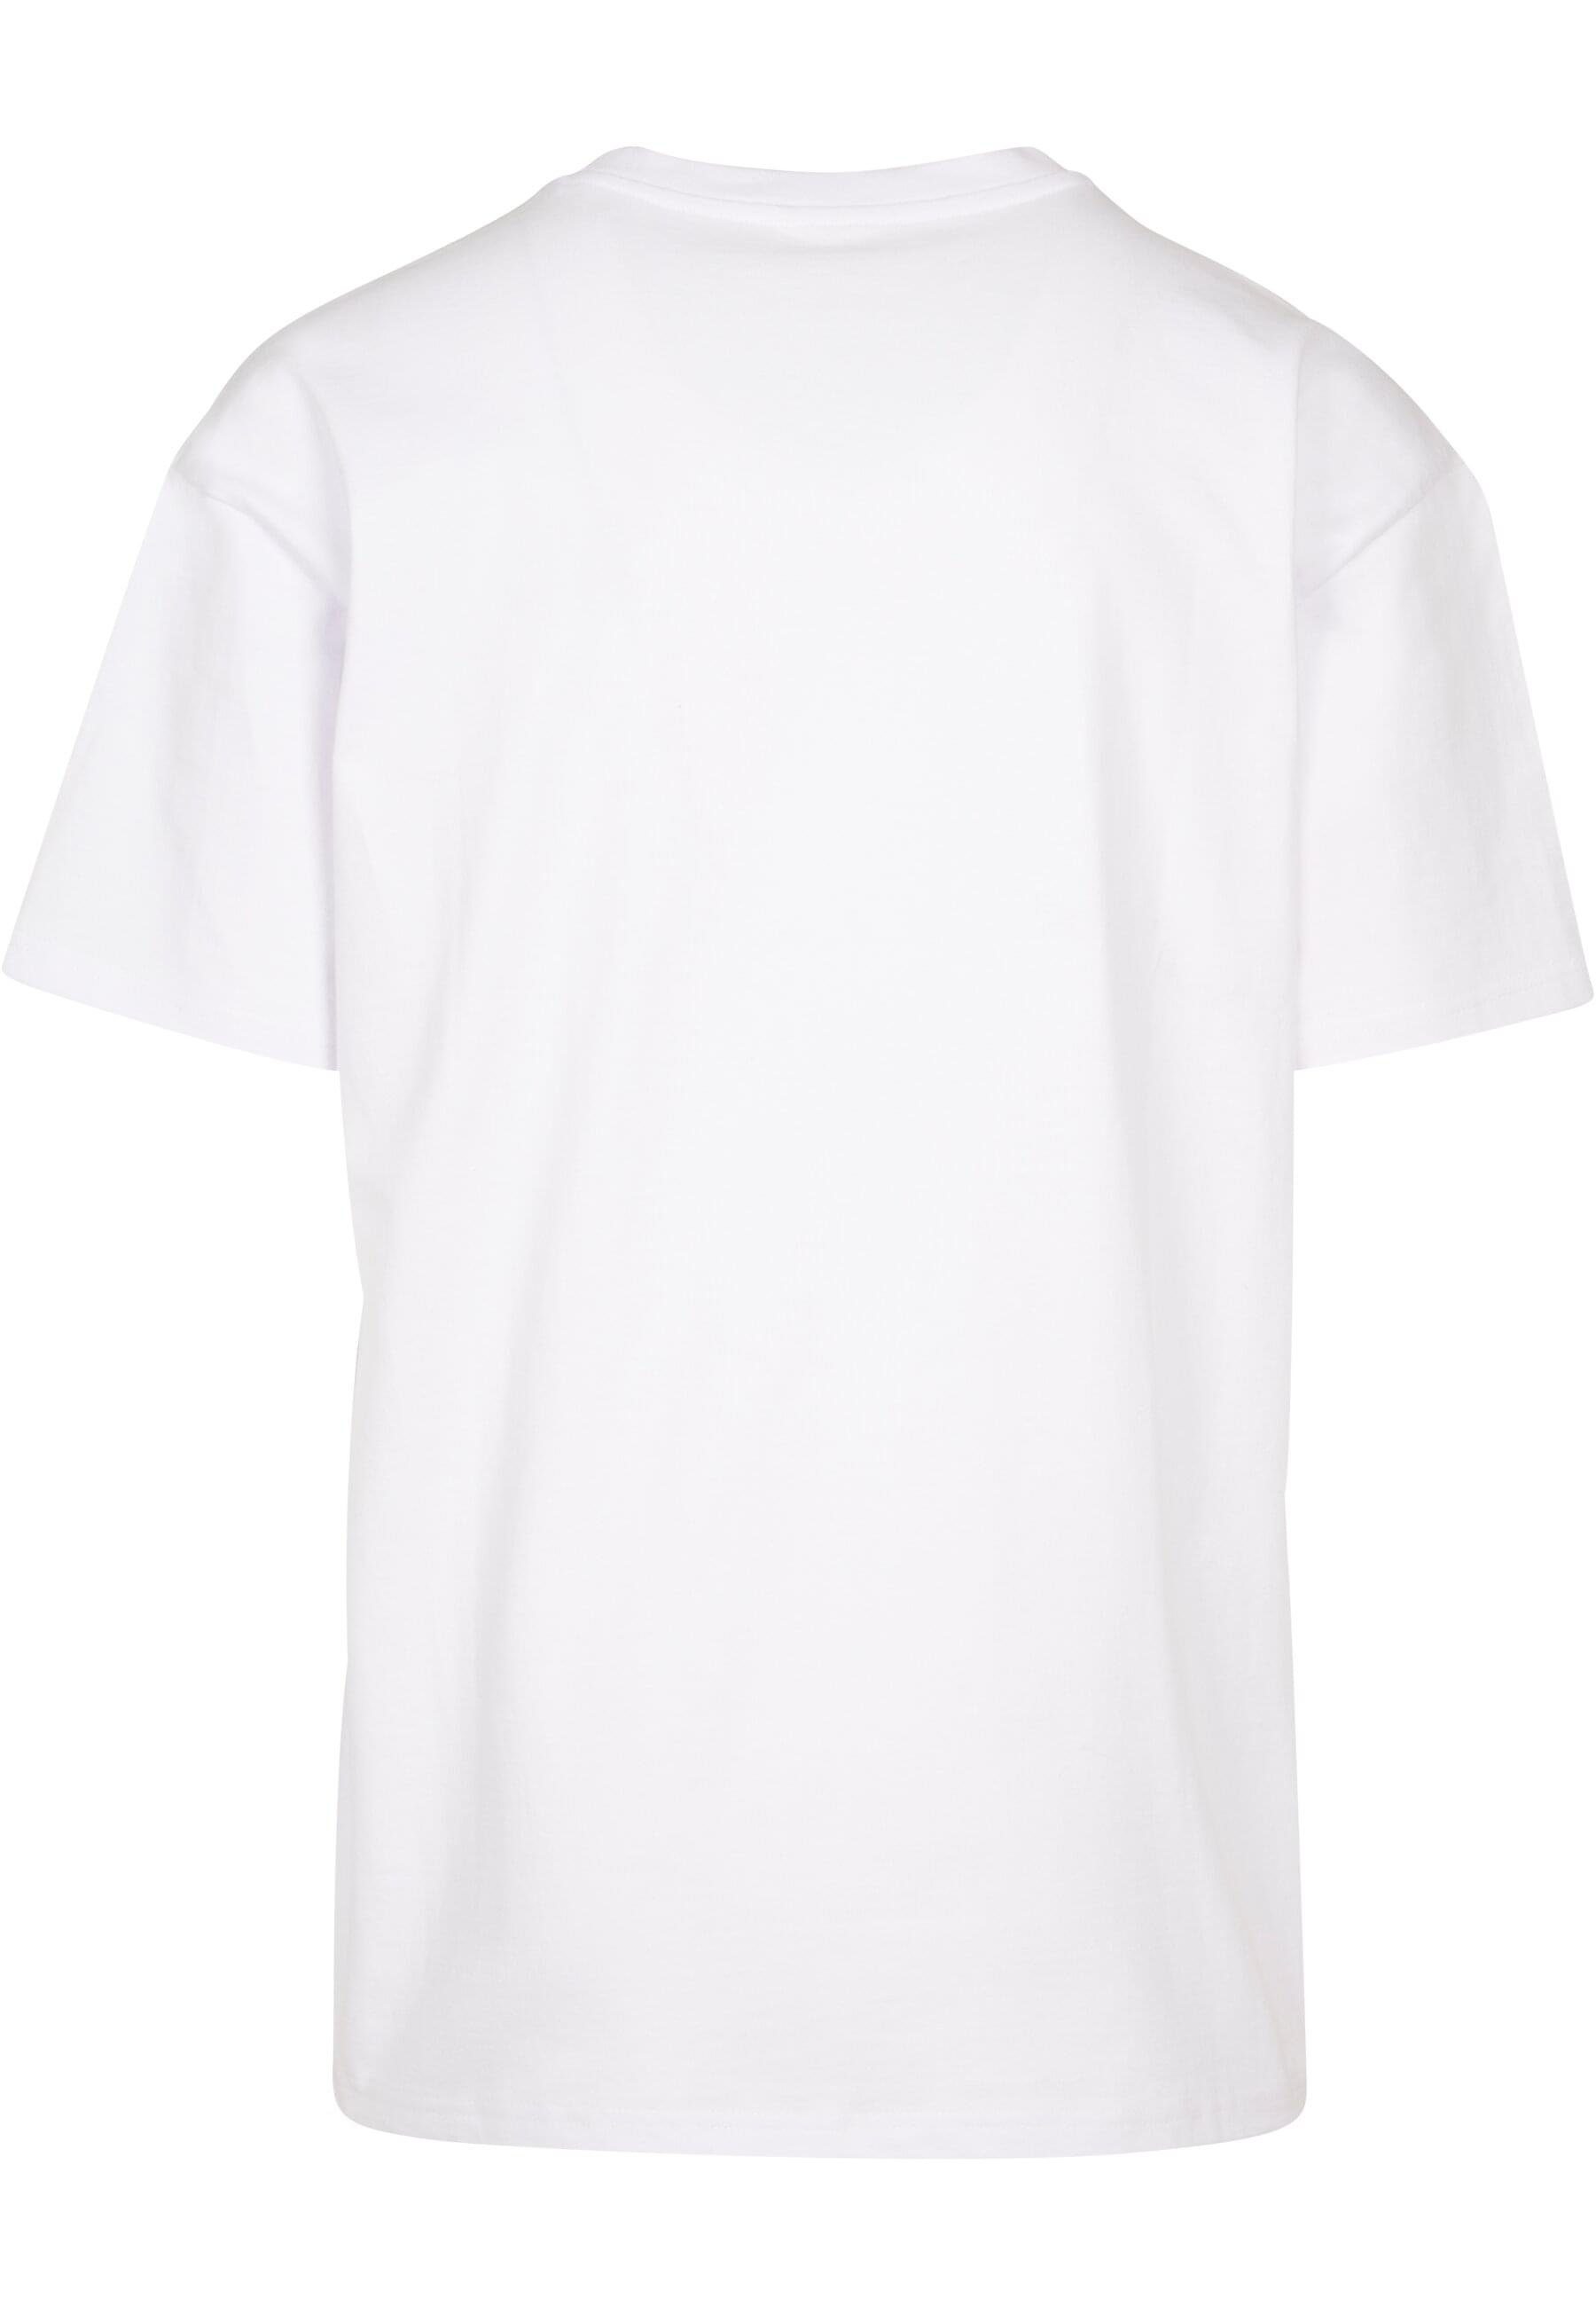 Tee Tee Mister white fly (1-tlg) Upscale Oversize to by T-Shirt Ready Unisex